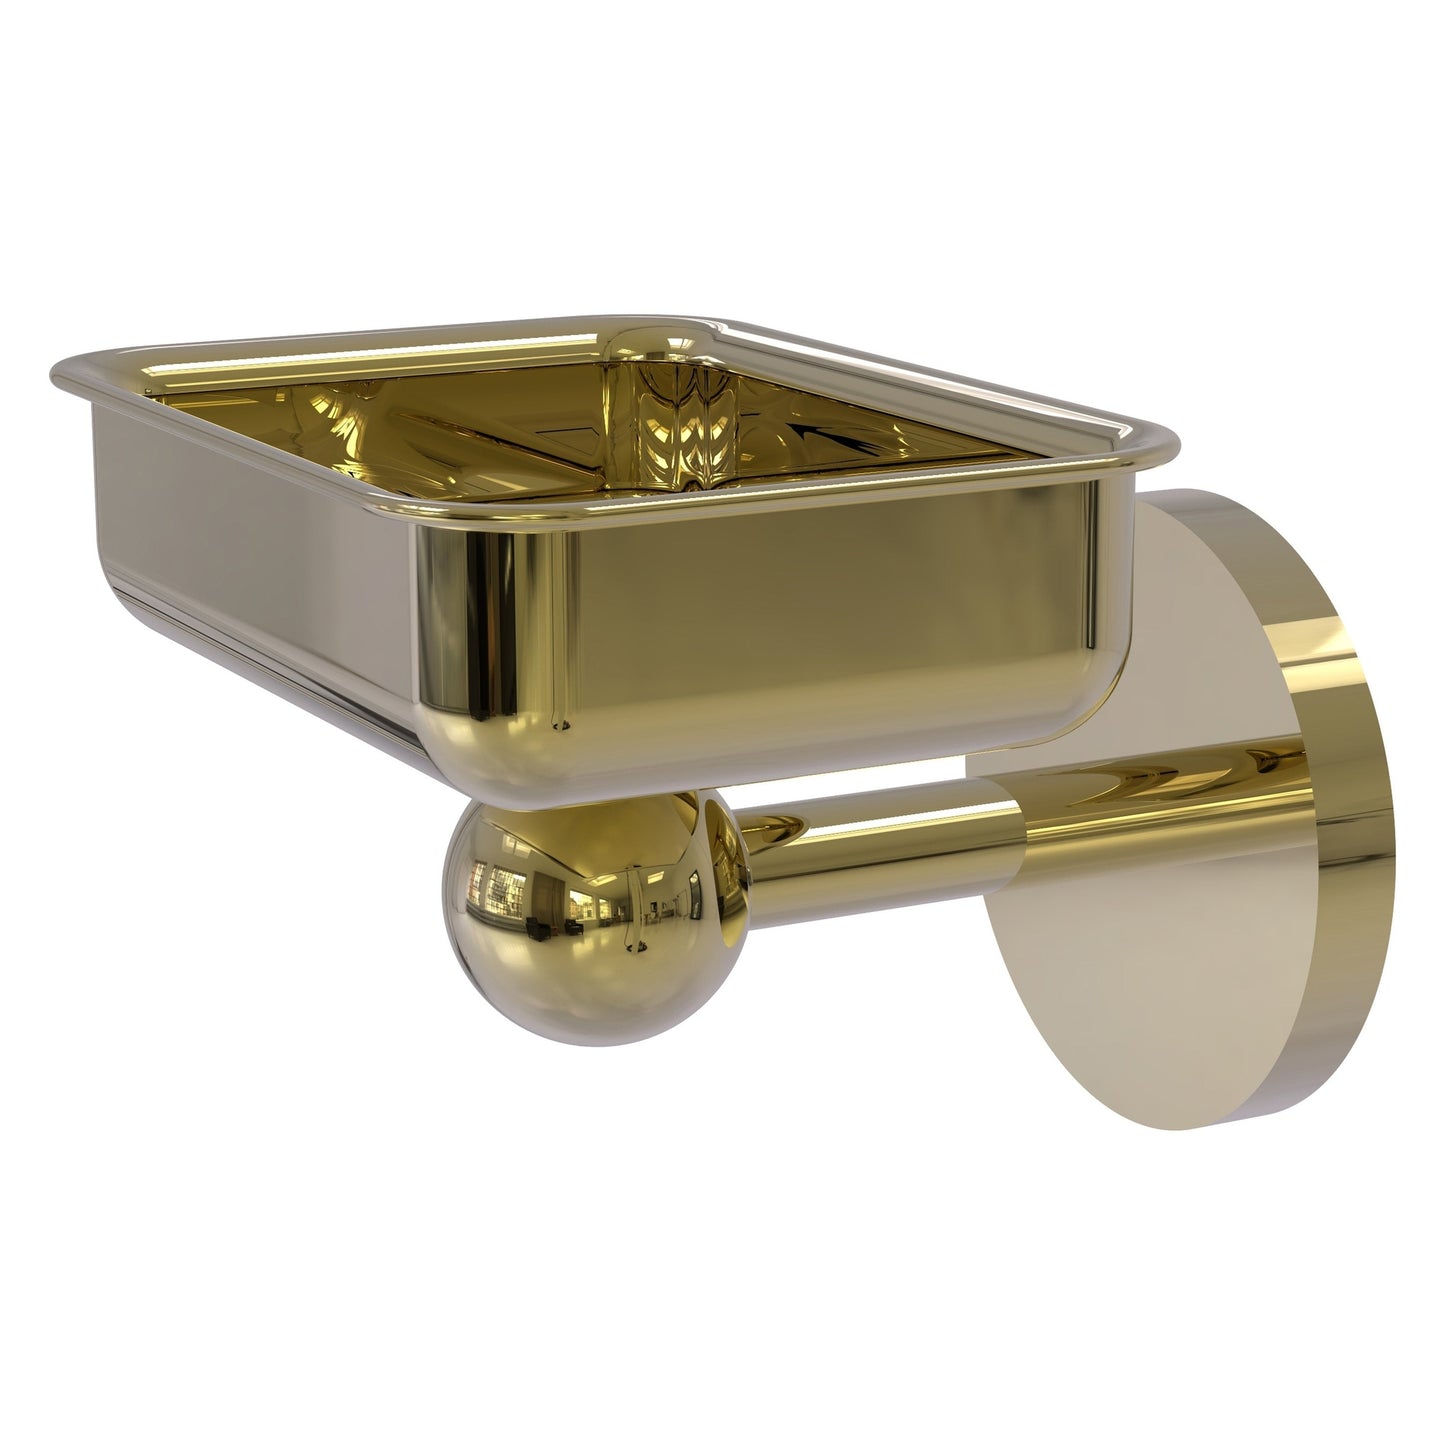 Allied Brass Skyline 4.5" x 3.5" Unlacquered Brass Solid Brass Wall-Mounted Soap Dish